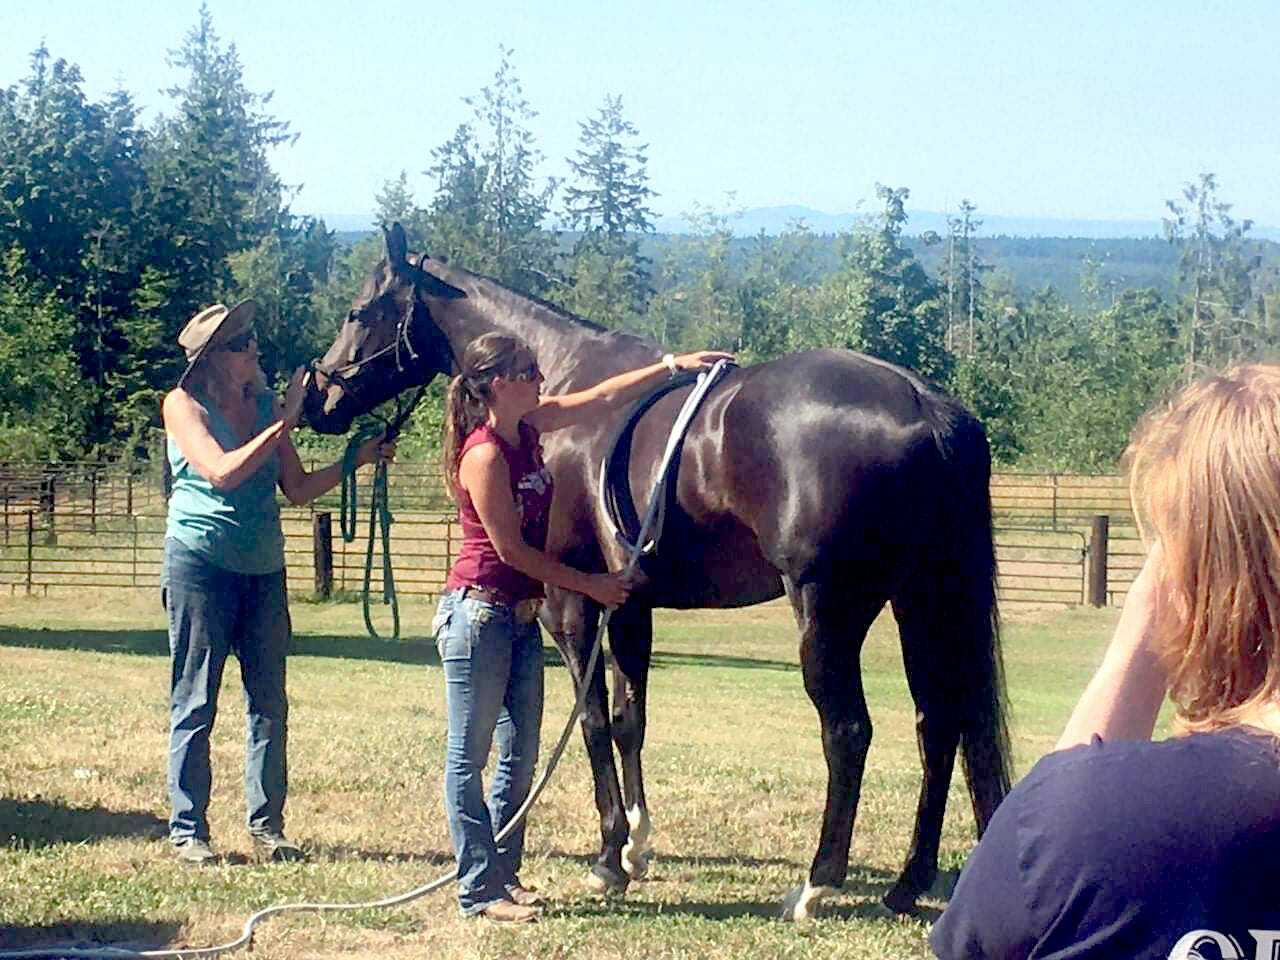 To promote healing of an injury, Dayna Killam performs pulsed electromagnetic field therapy on Nova, a horse owned by Lori Colson George, during an Olympic Peninsula Equine Network fundraising event held at Layton Hill Horse Camp in Sequim. (Karen Griffiths/for Peninsula Daily News)